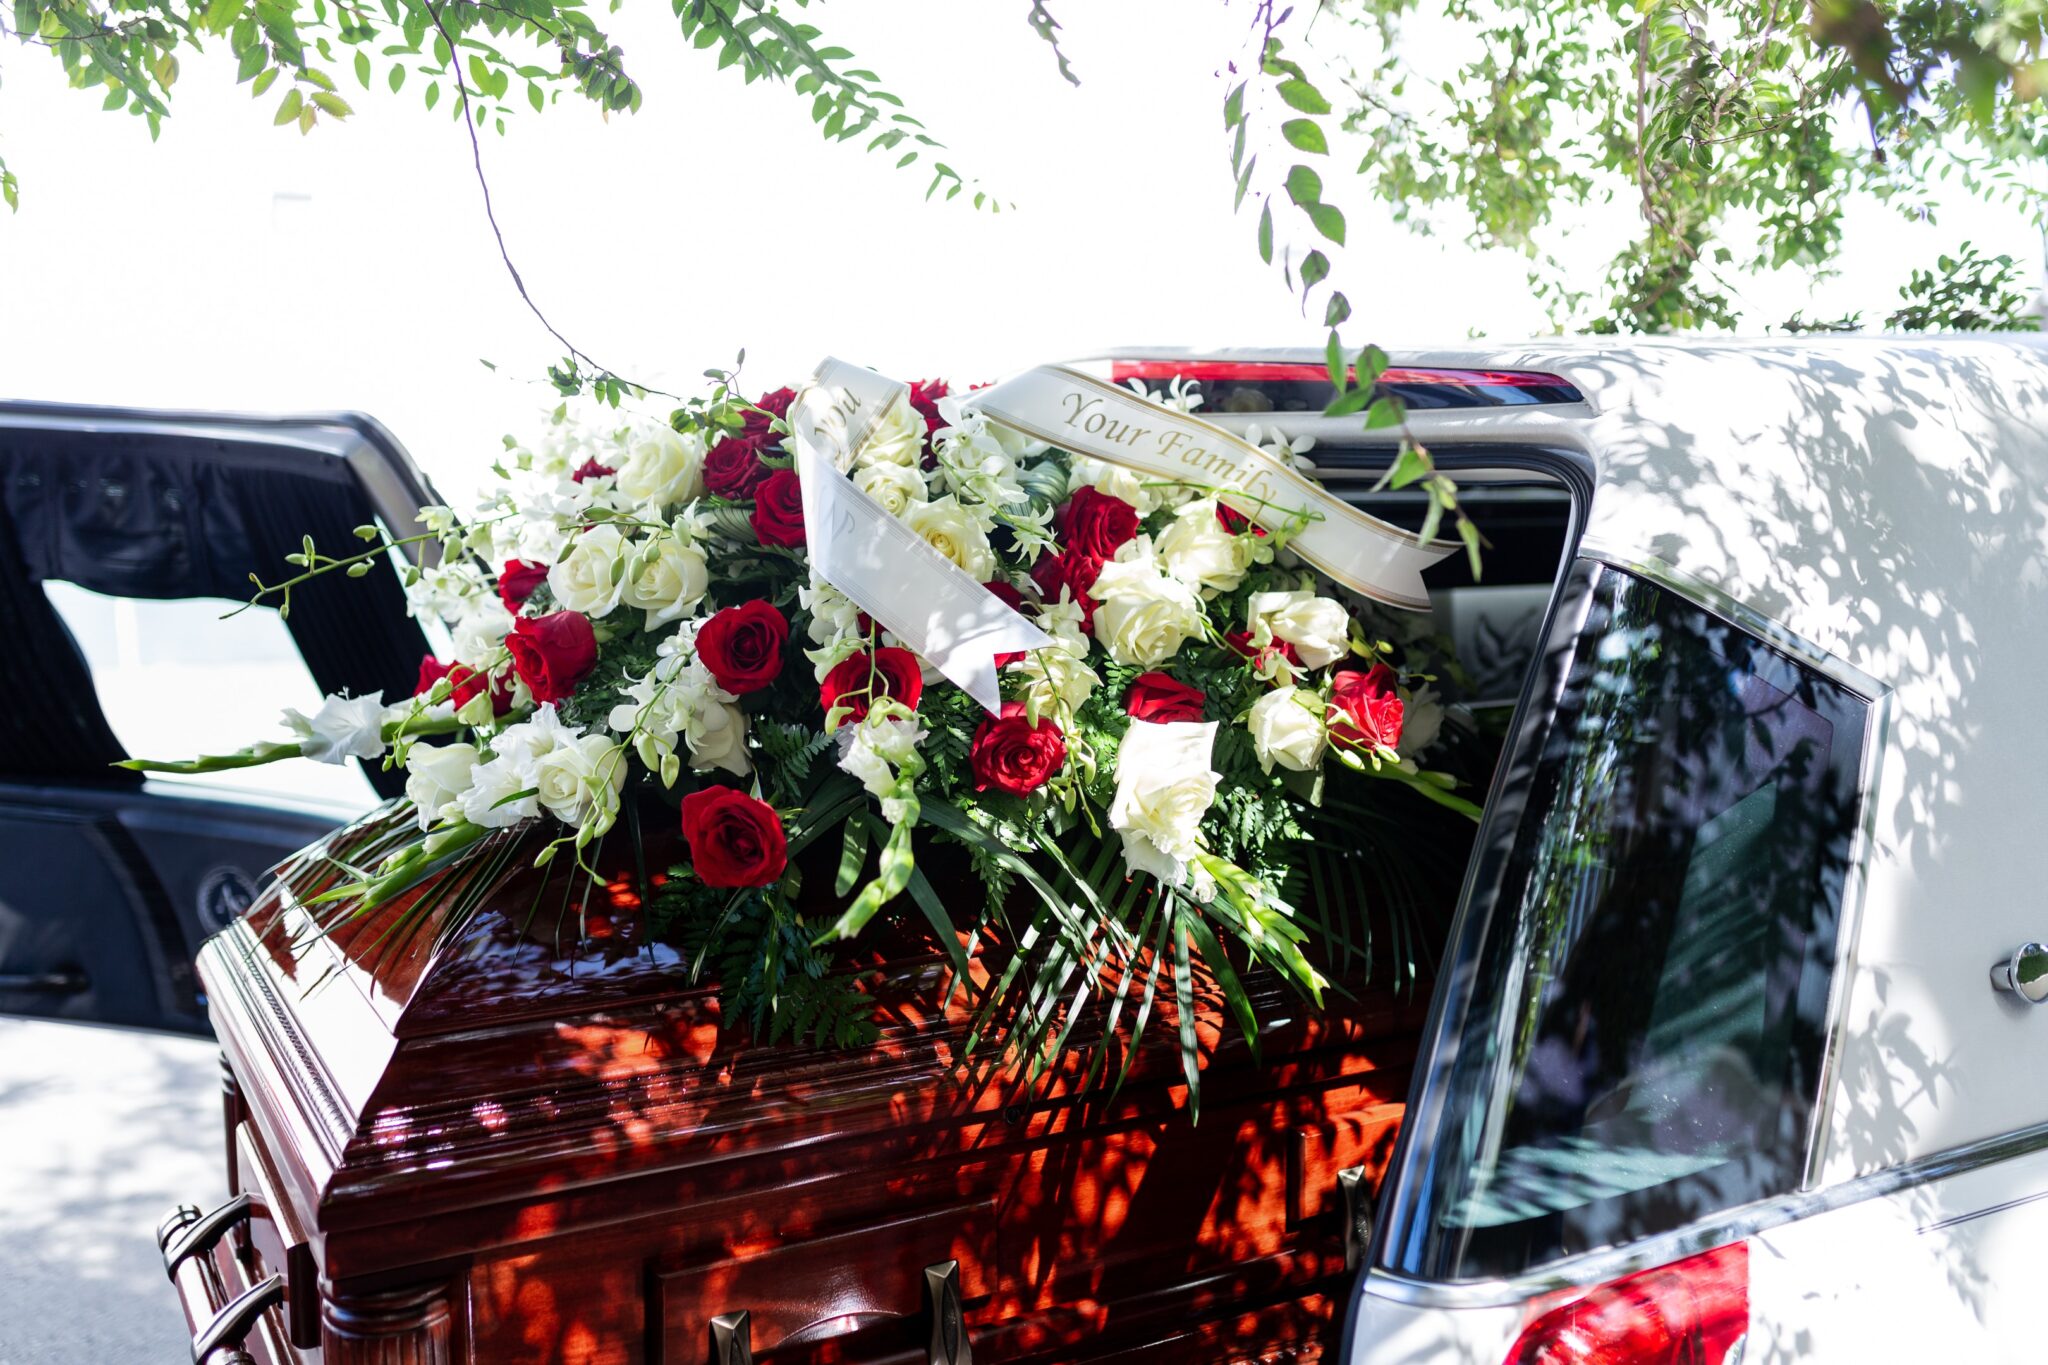 Picture of coffin with flowers inside a car